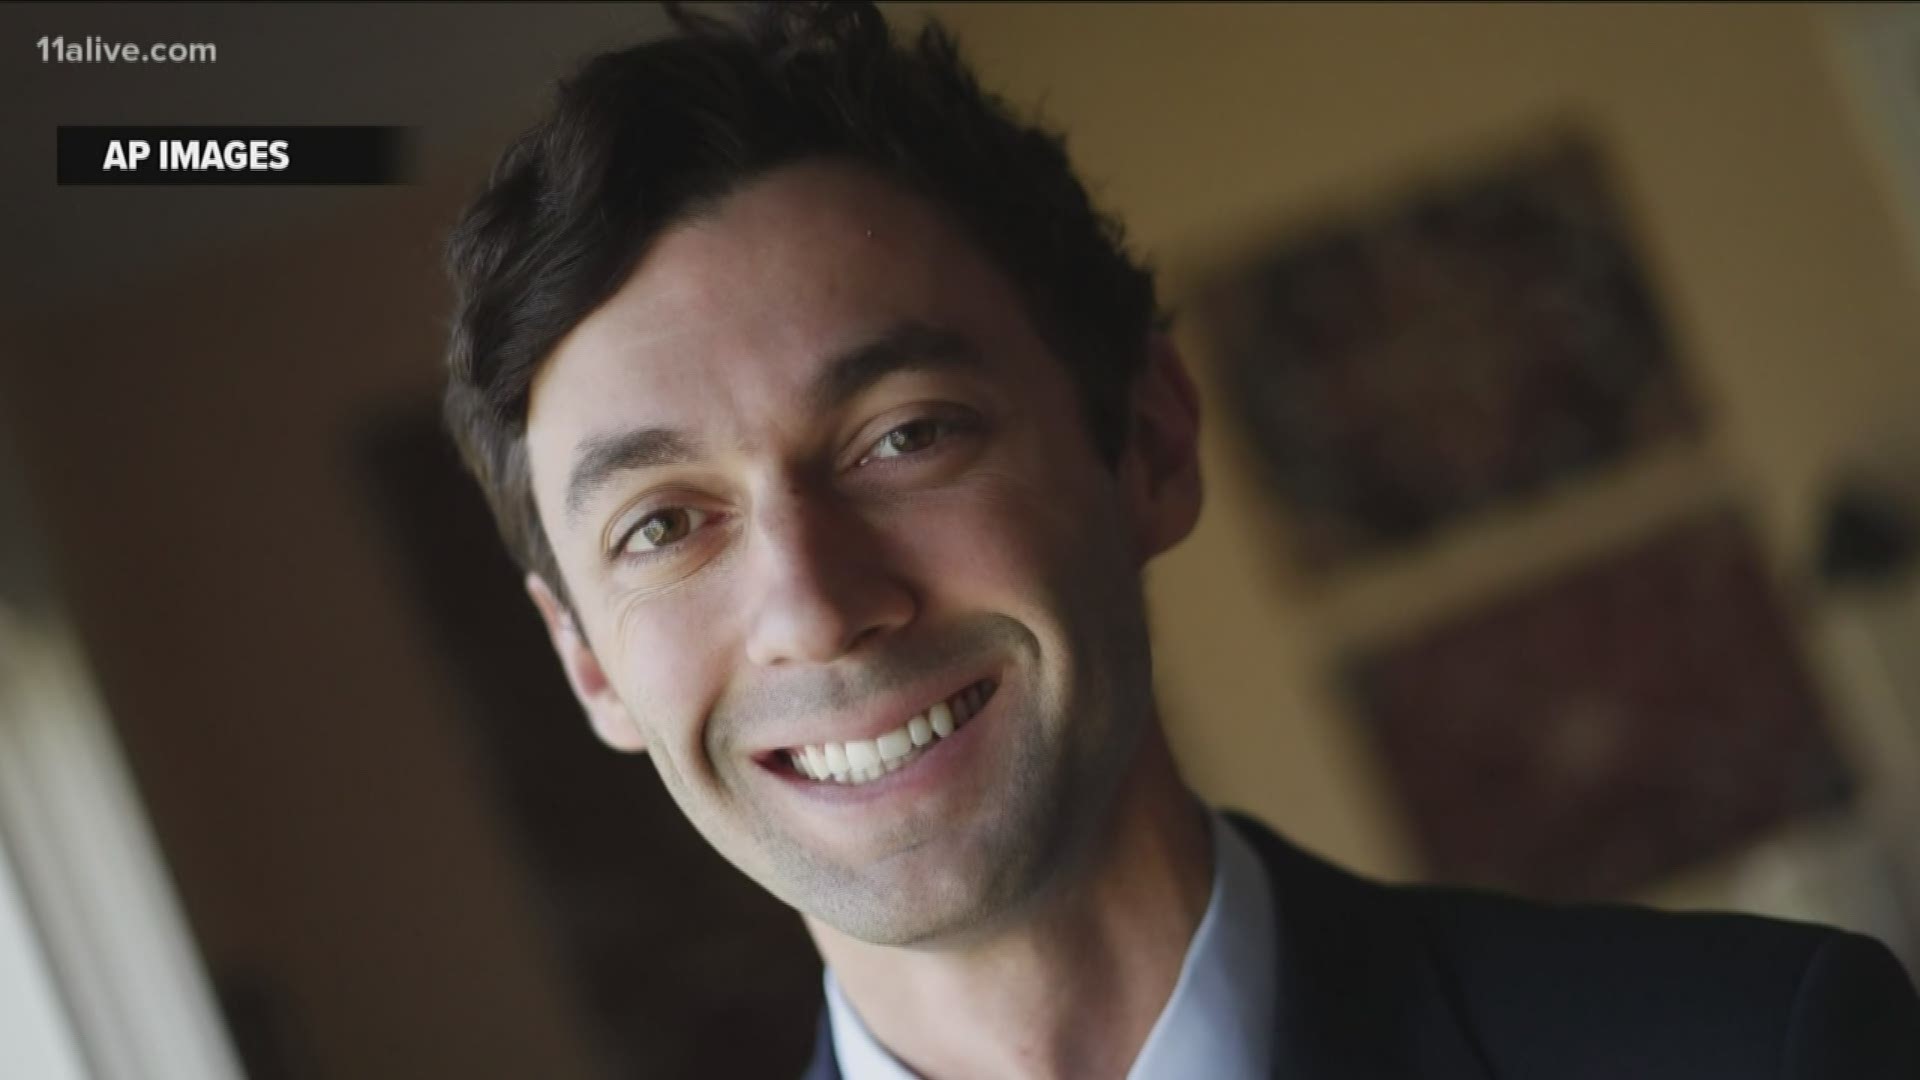 Ossoff previously ran in 2017 special House election in Georgia's 6th District.